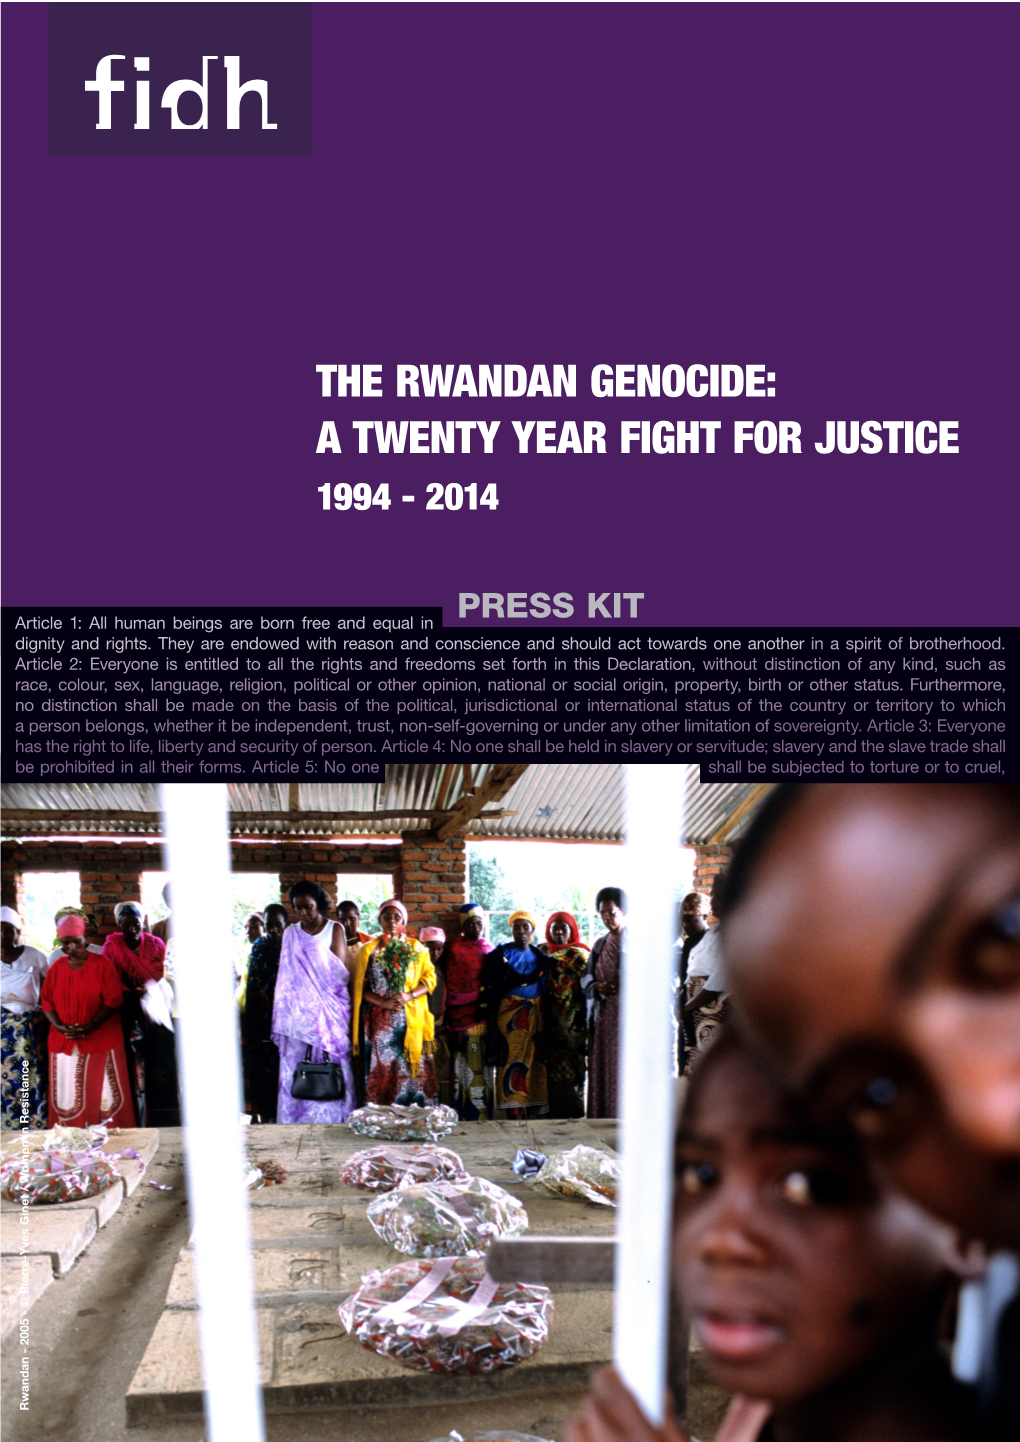 The Rwandan Genocide: a Twenty Year Fight for Justice 1994 - 2014